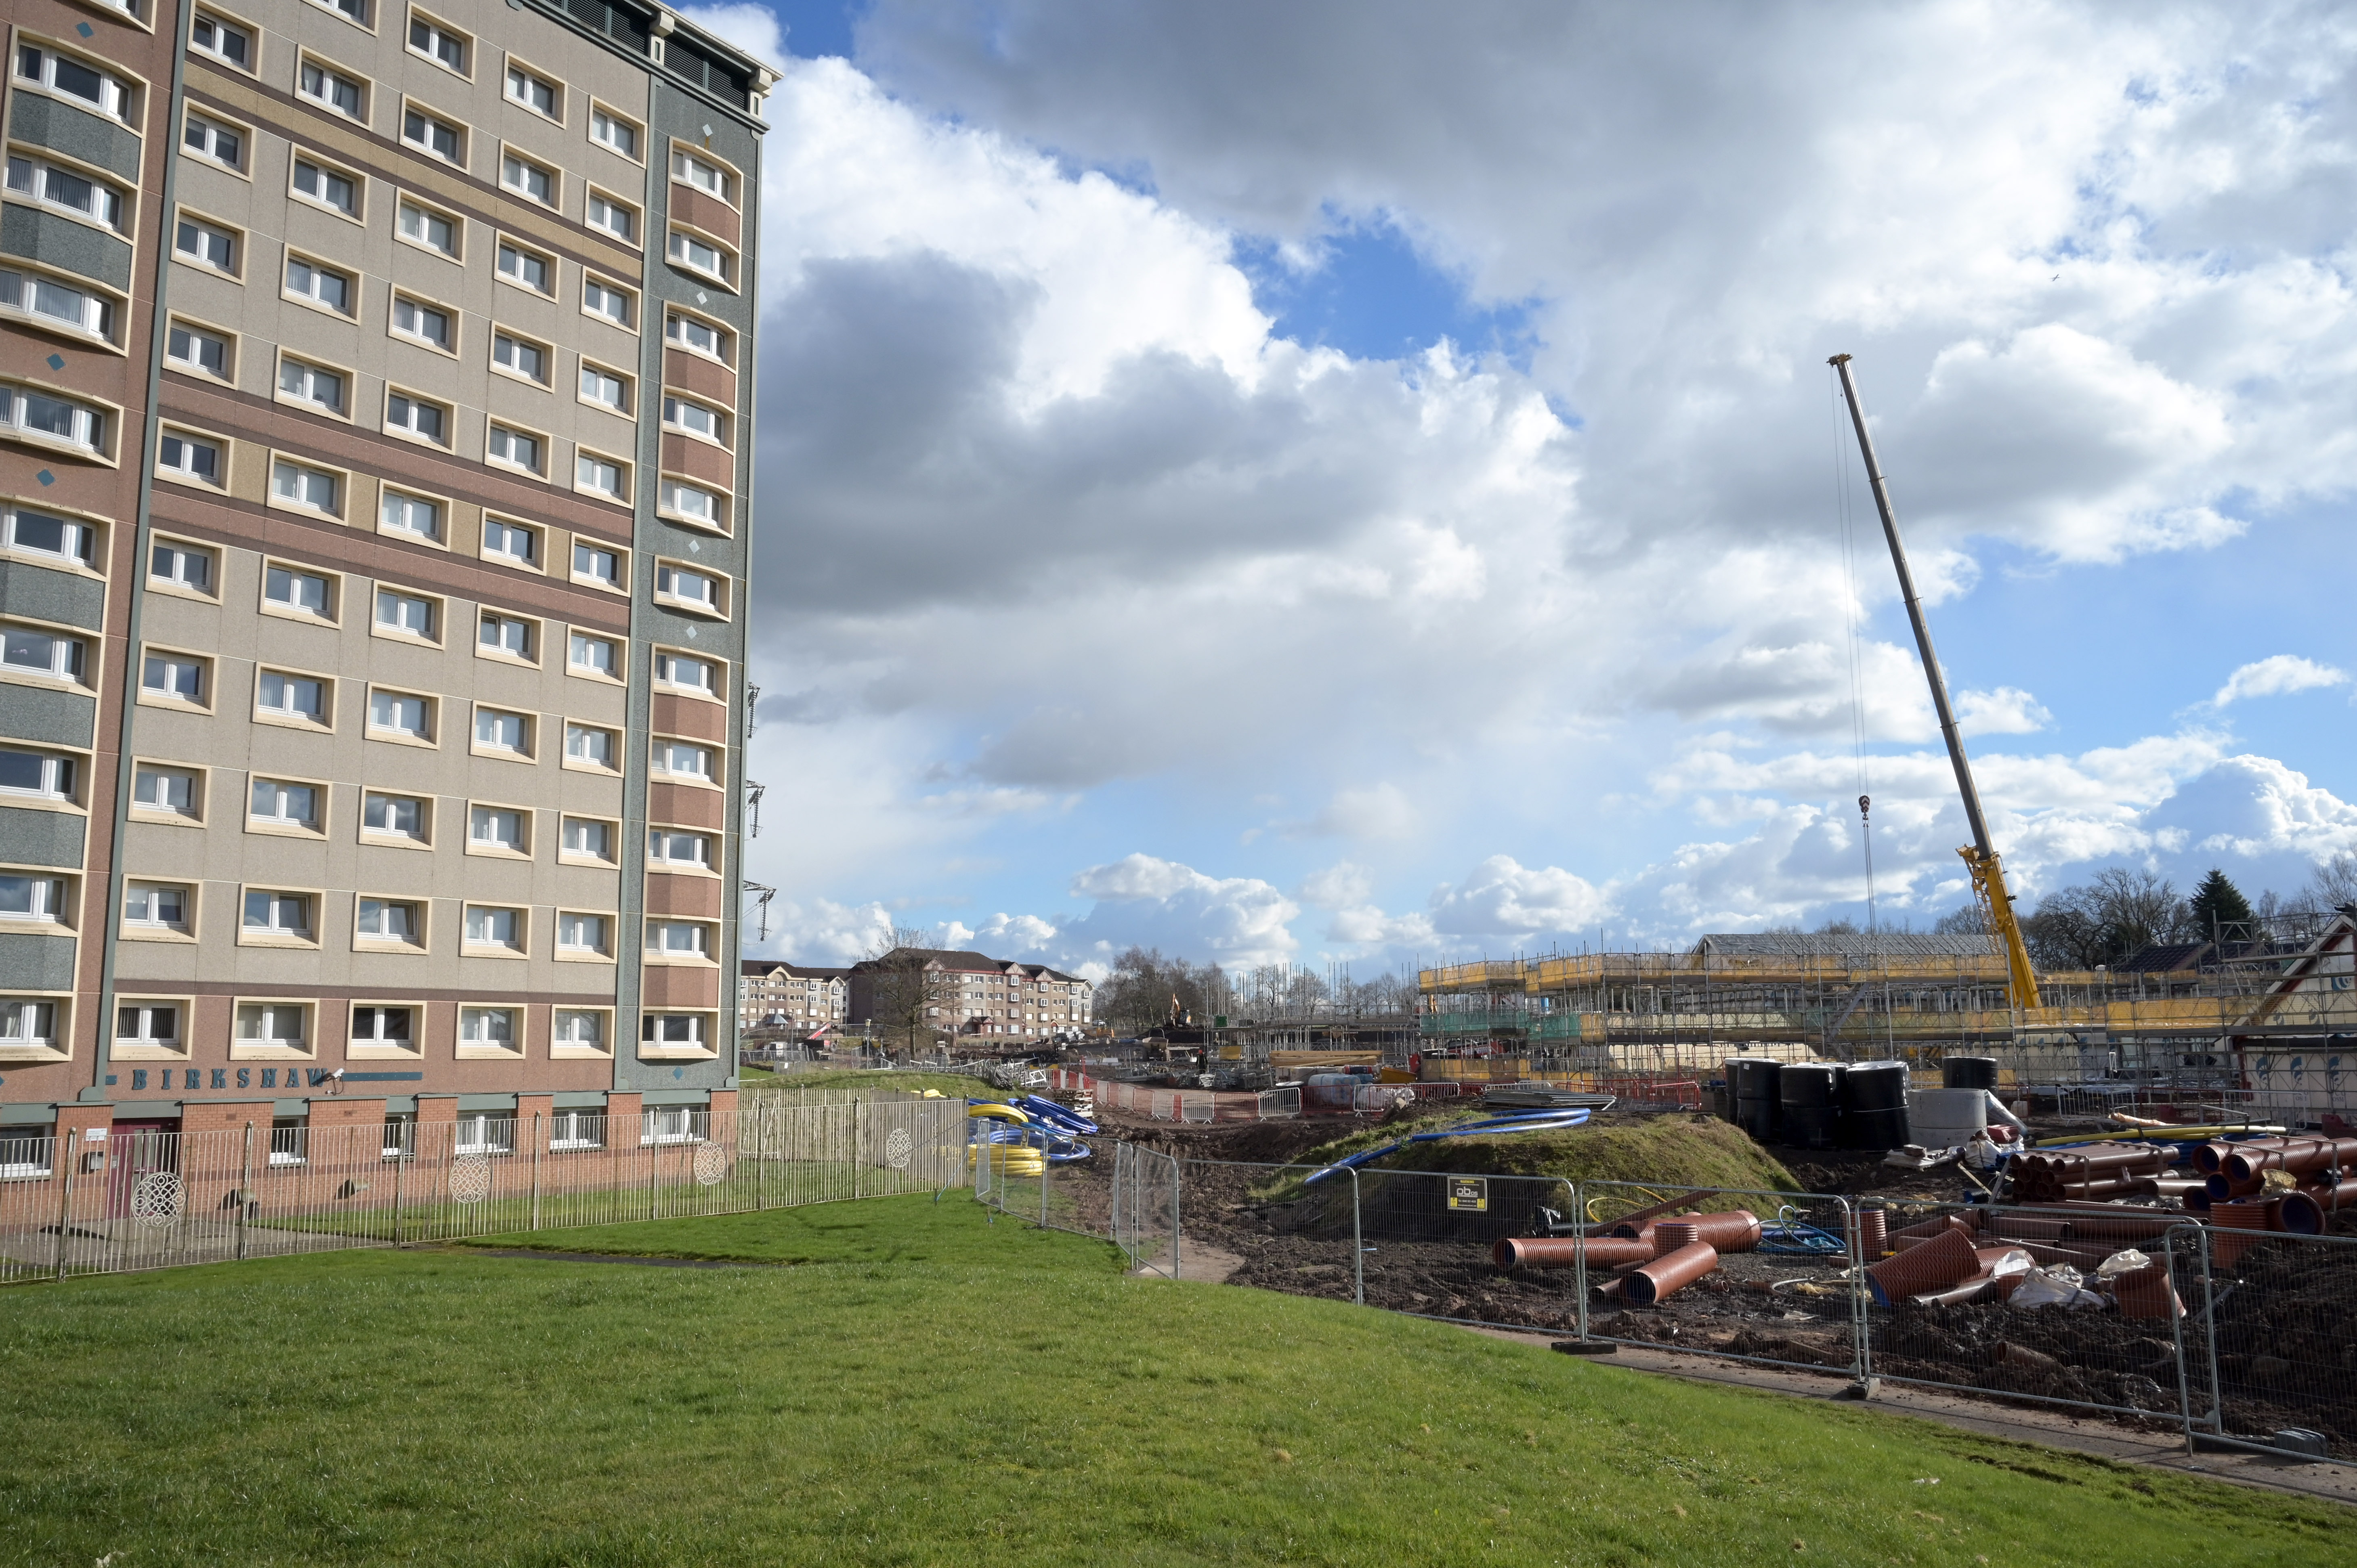 Report highlights continued benefits of housing investment in North Lanarkshire